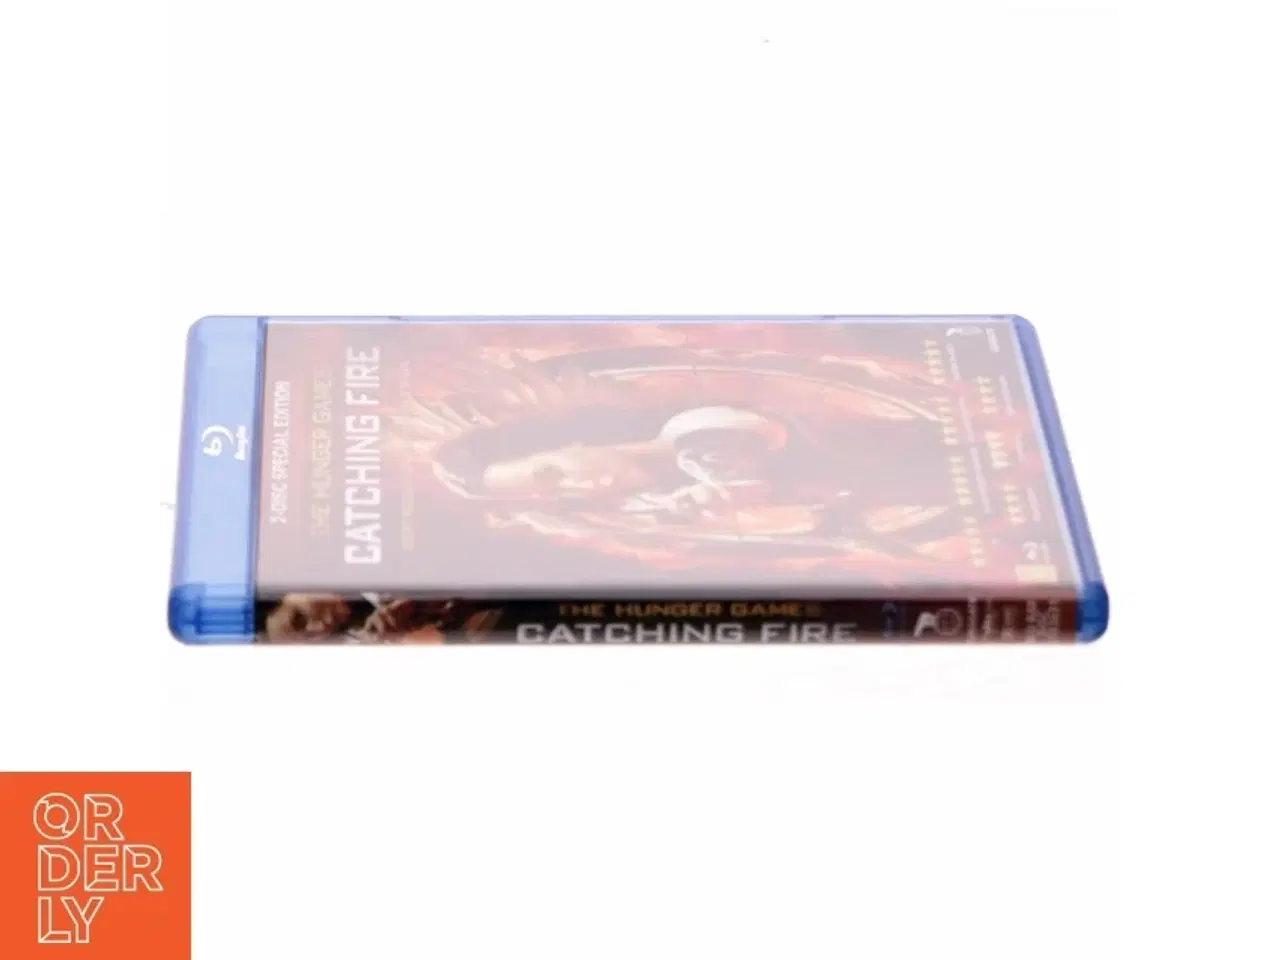 Billede 2 - The Hunger Games - Cathing fire (Blu-ray)